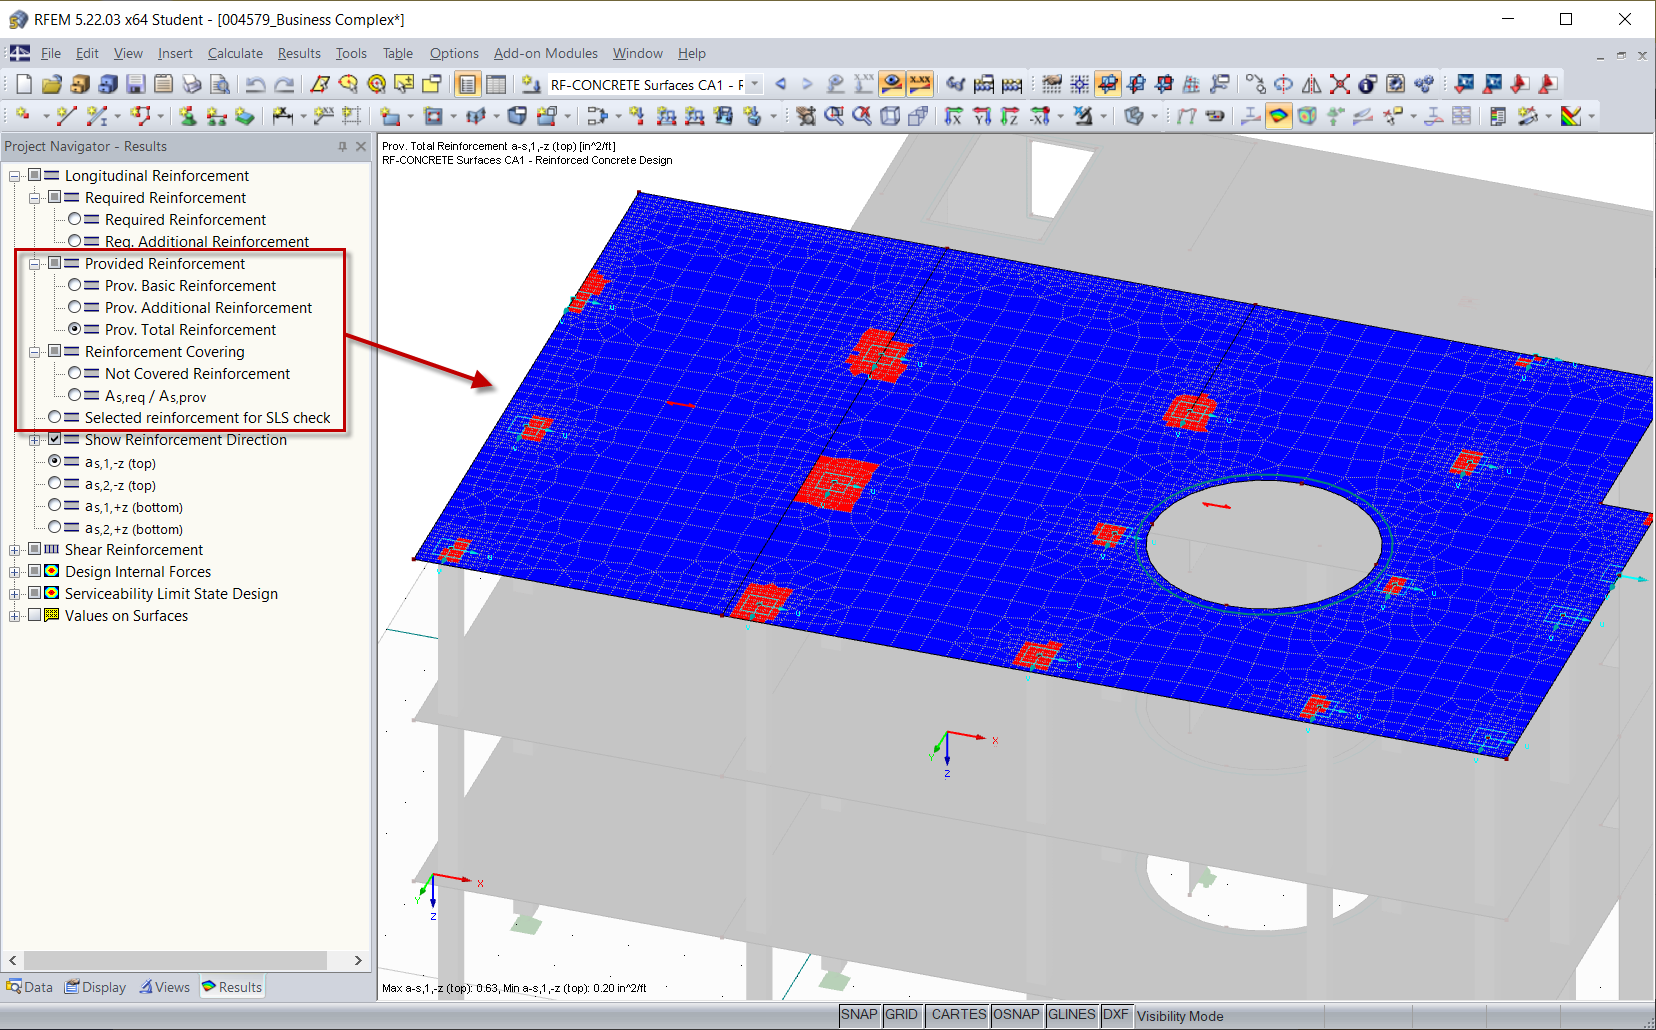 Options in Result Navigator of RF-CONCRETE Surfaces